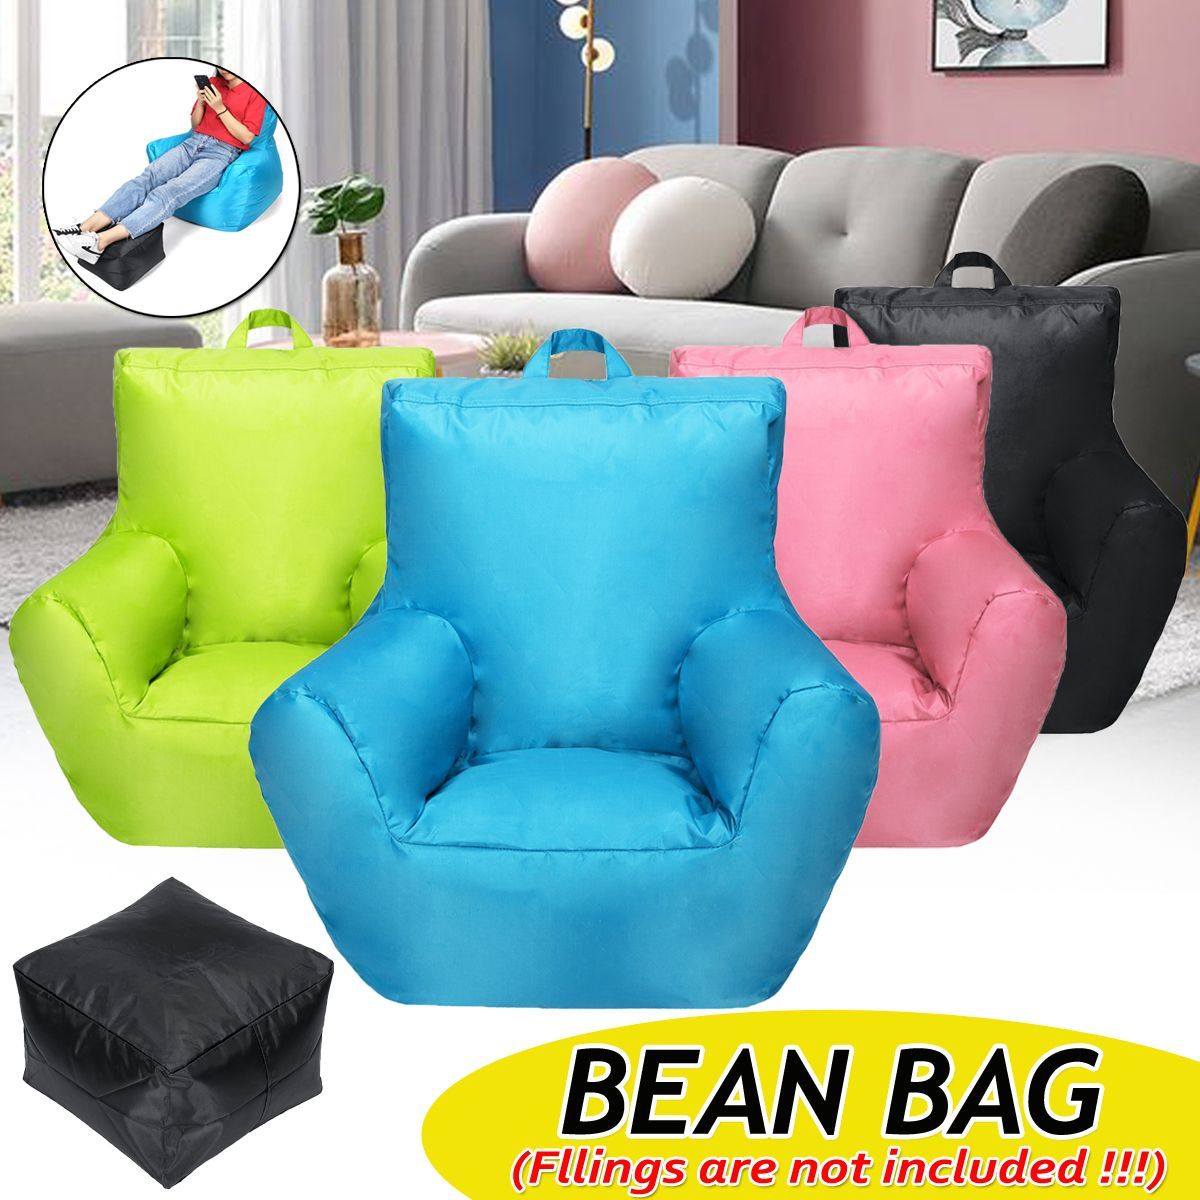 Comfortable-Bean-Bag-Cover-Chair-Gaming-Lounge-Living-Room-Bedroom-Playroom-Seat-1633789